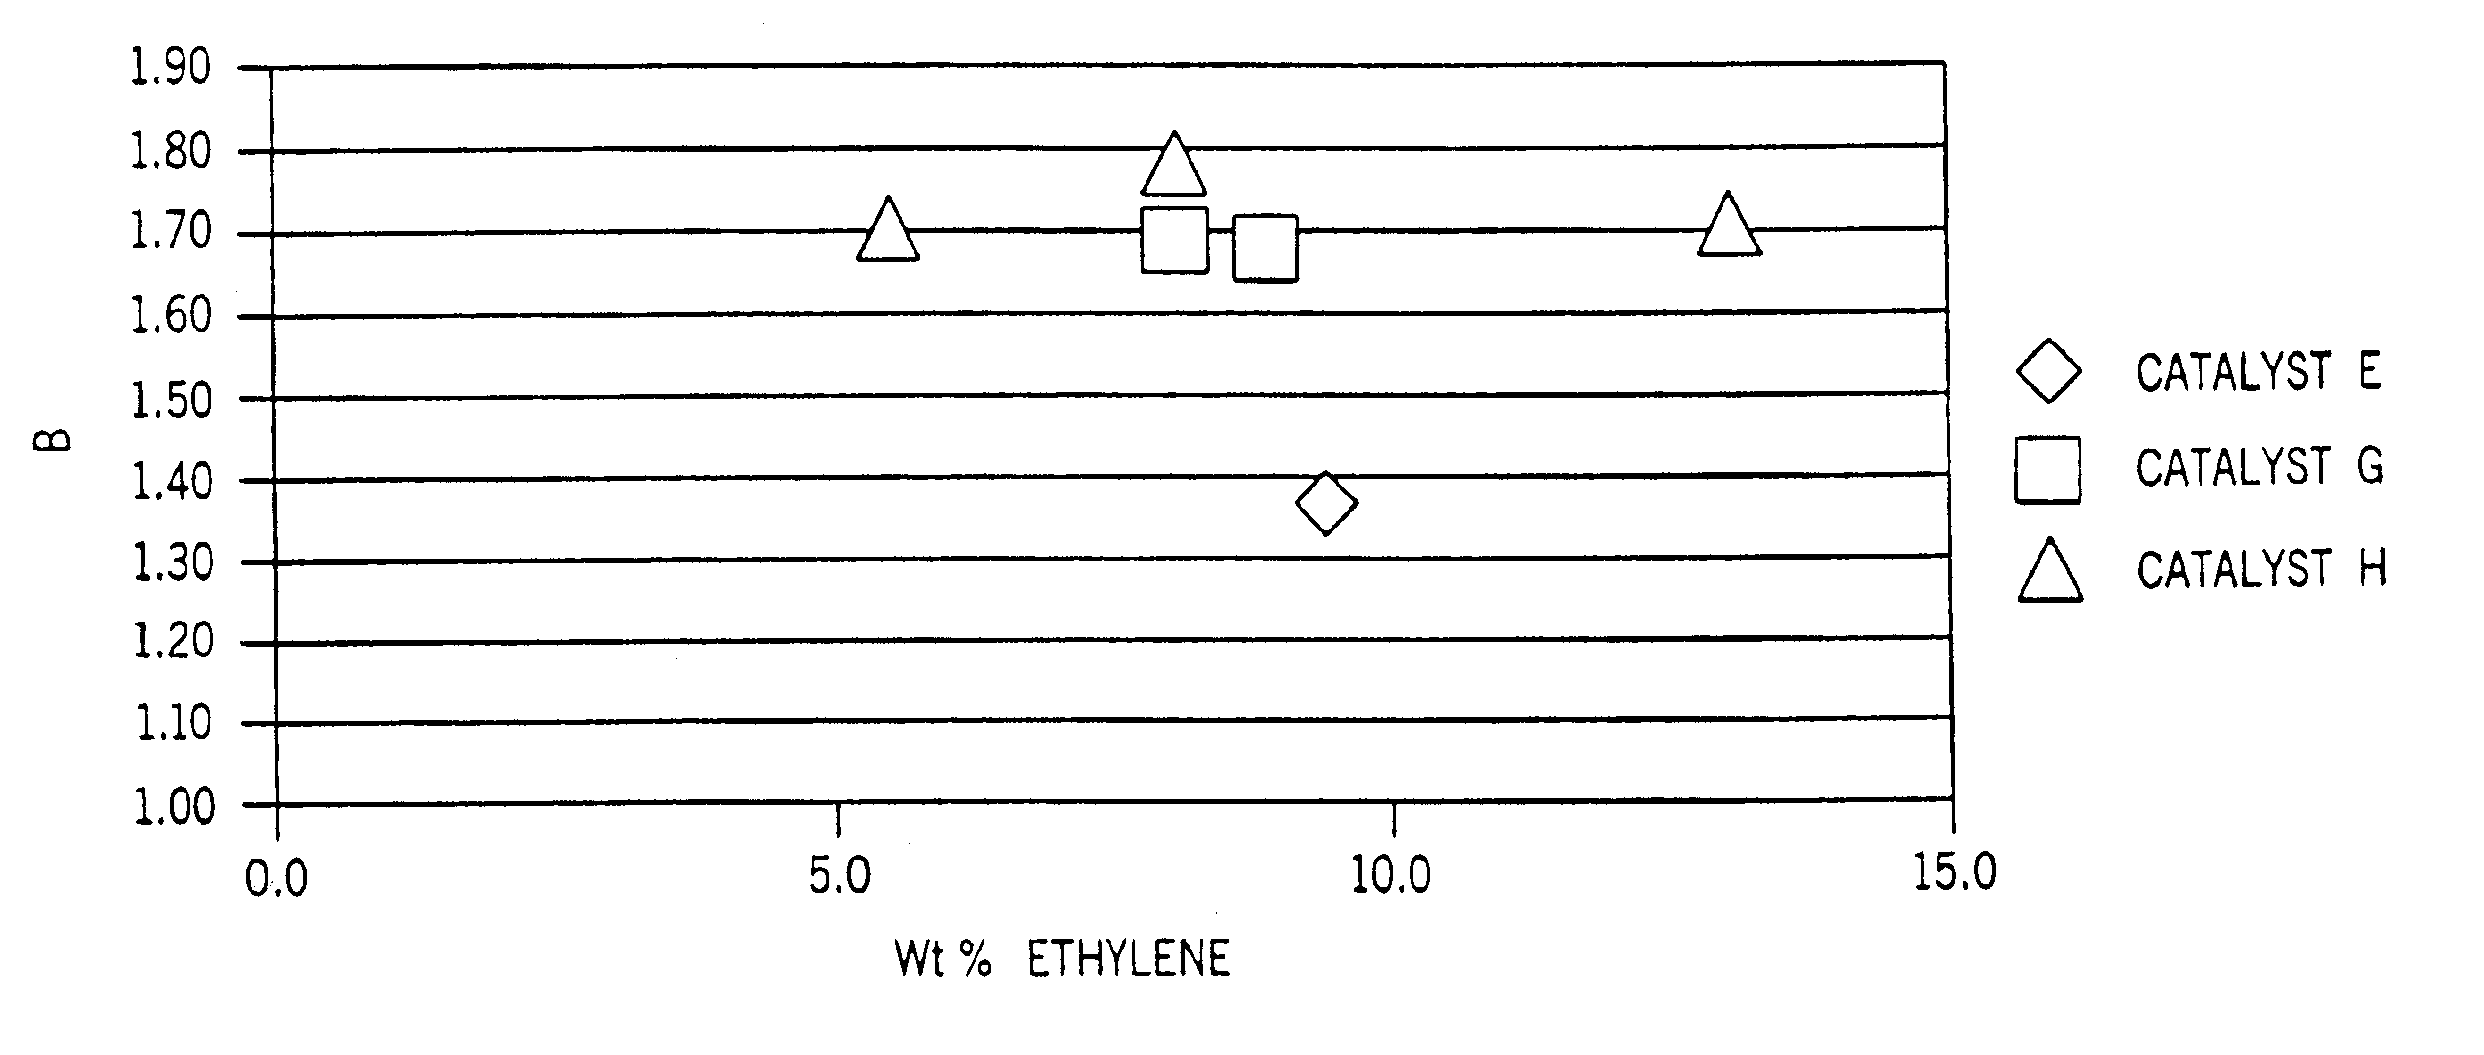 Blends and sealant compositions comprising isotactic propylene copolymers